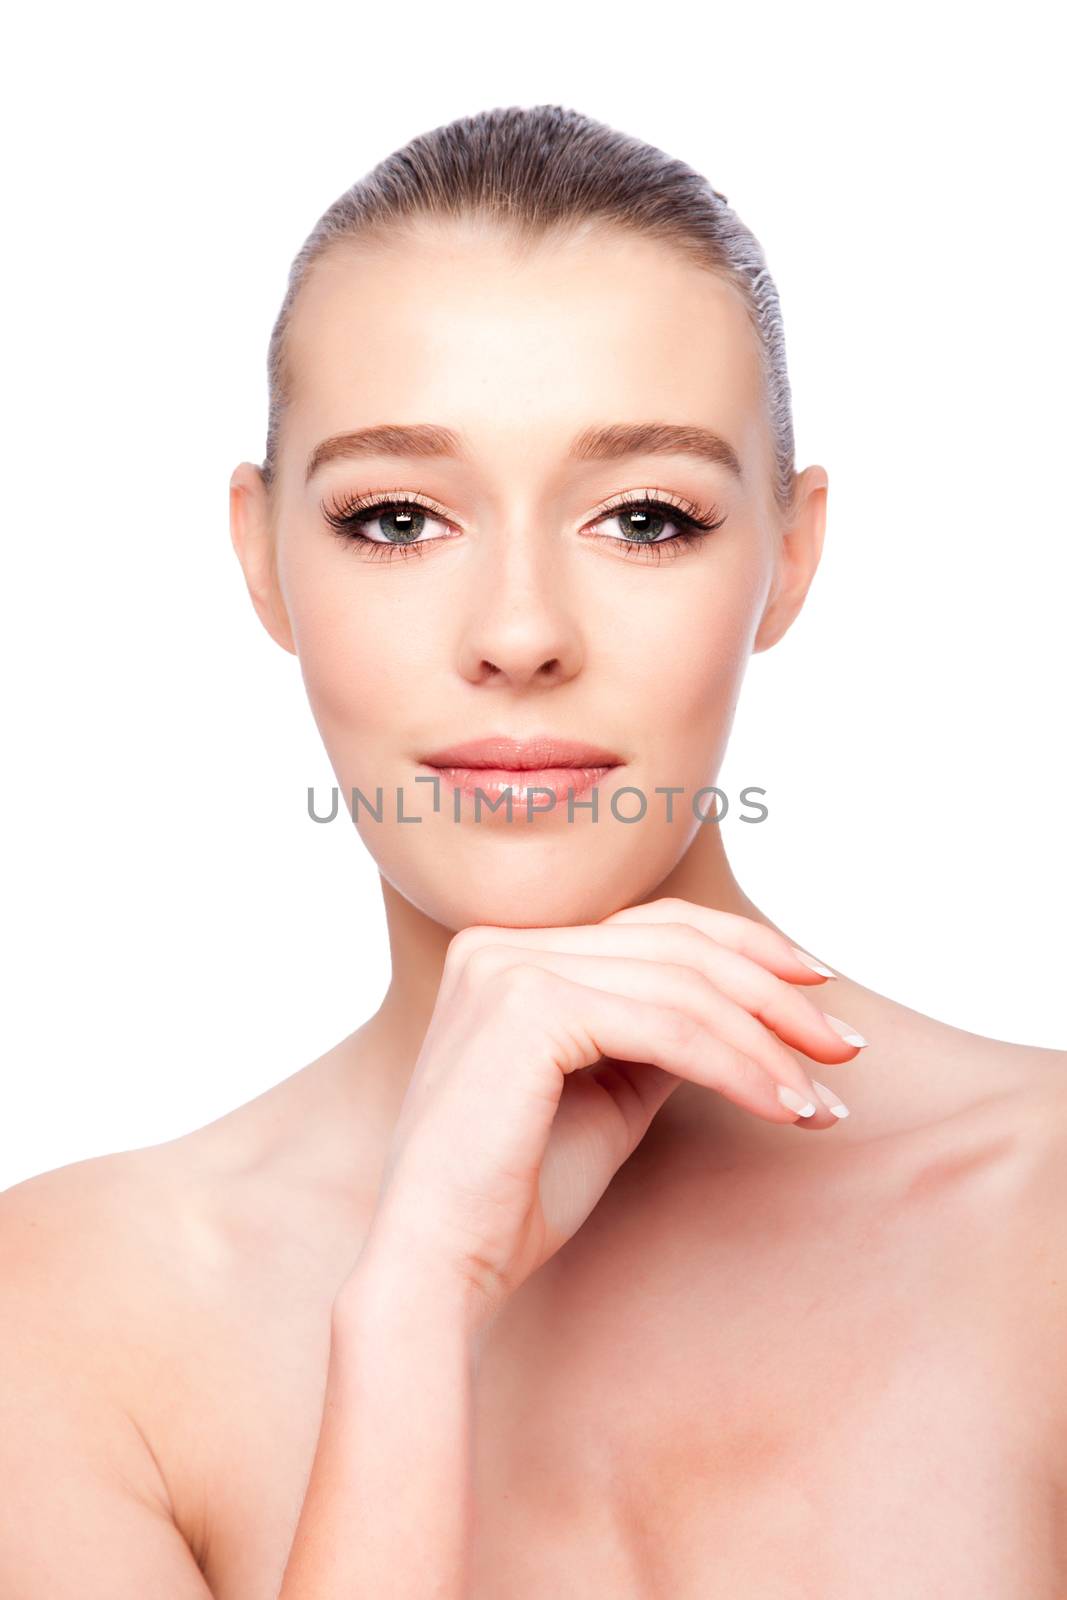 Beautiful clean face of woman, aesthetics skincare concept, on white.